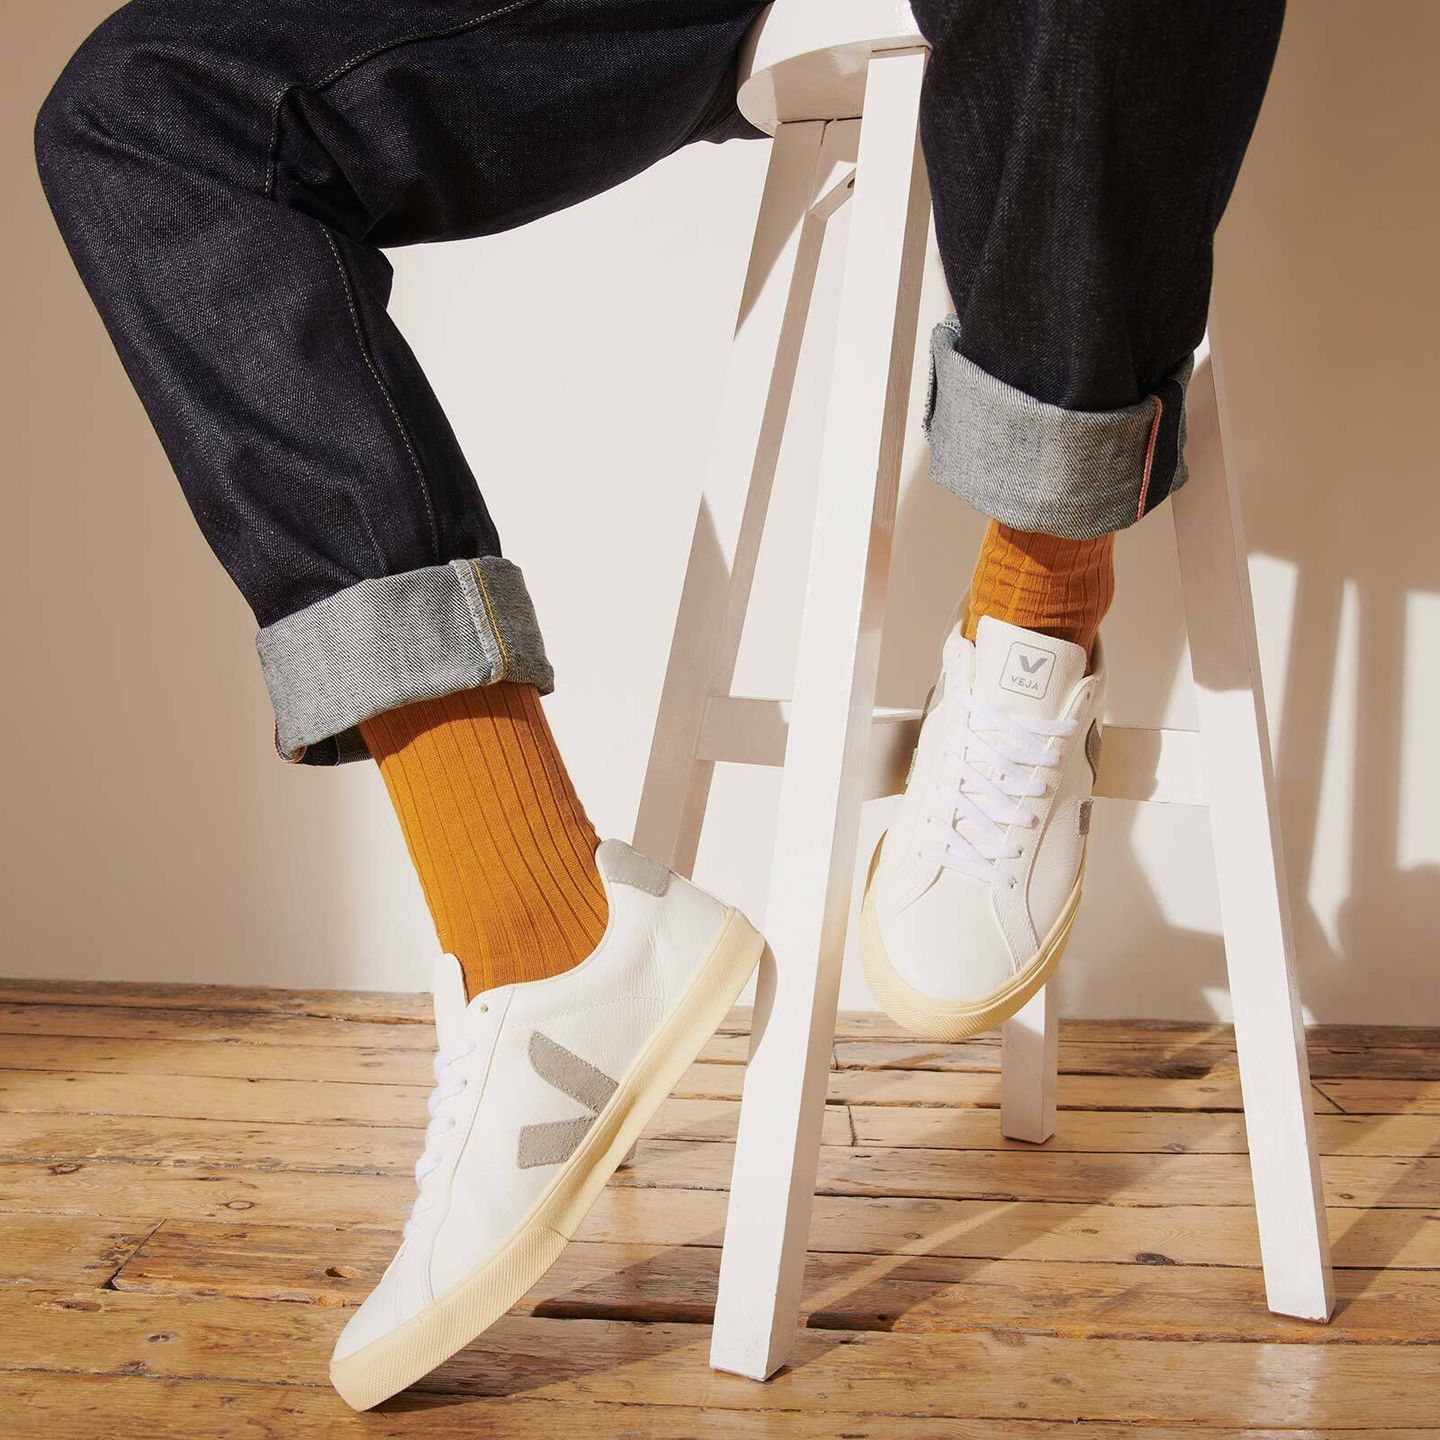 Man sitting on white stool in black denim jeans, saffron socks and paired with white trainers